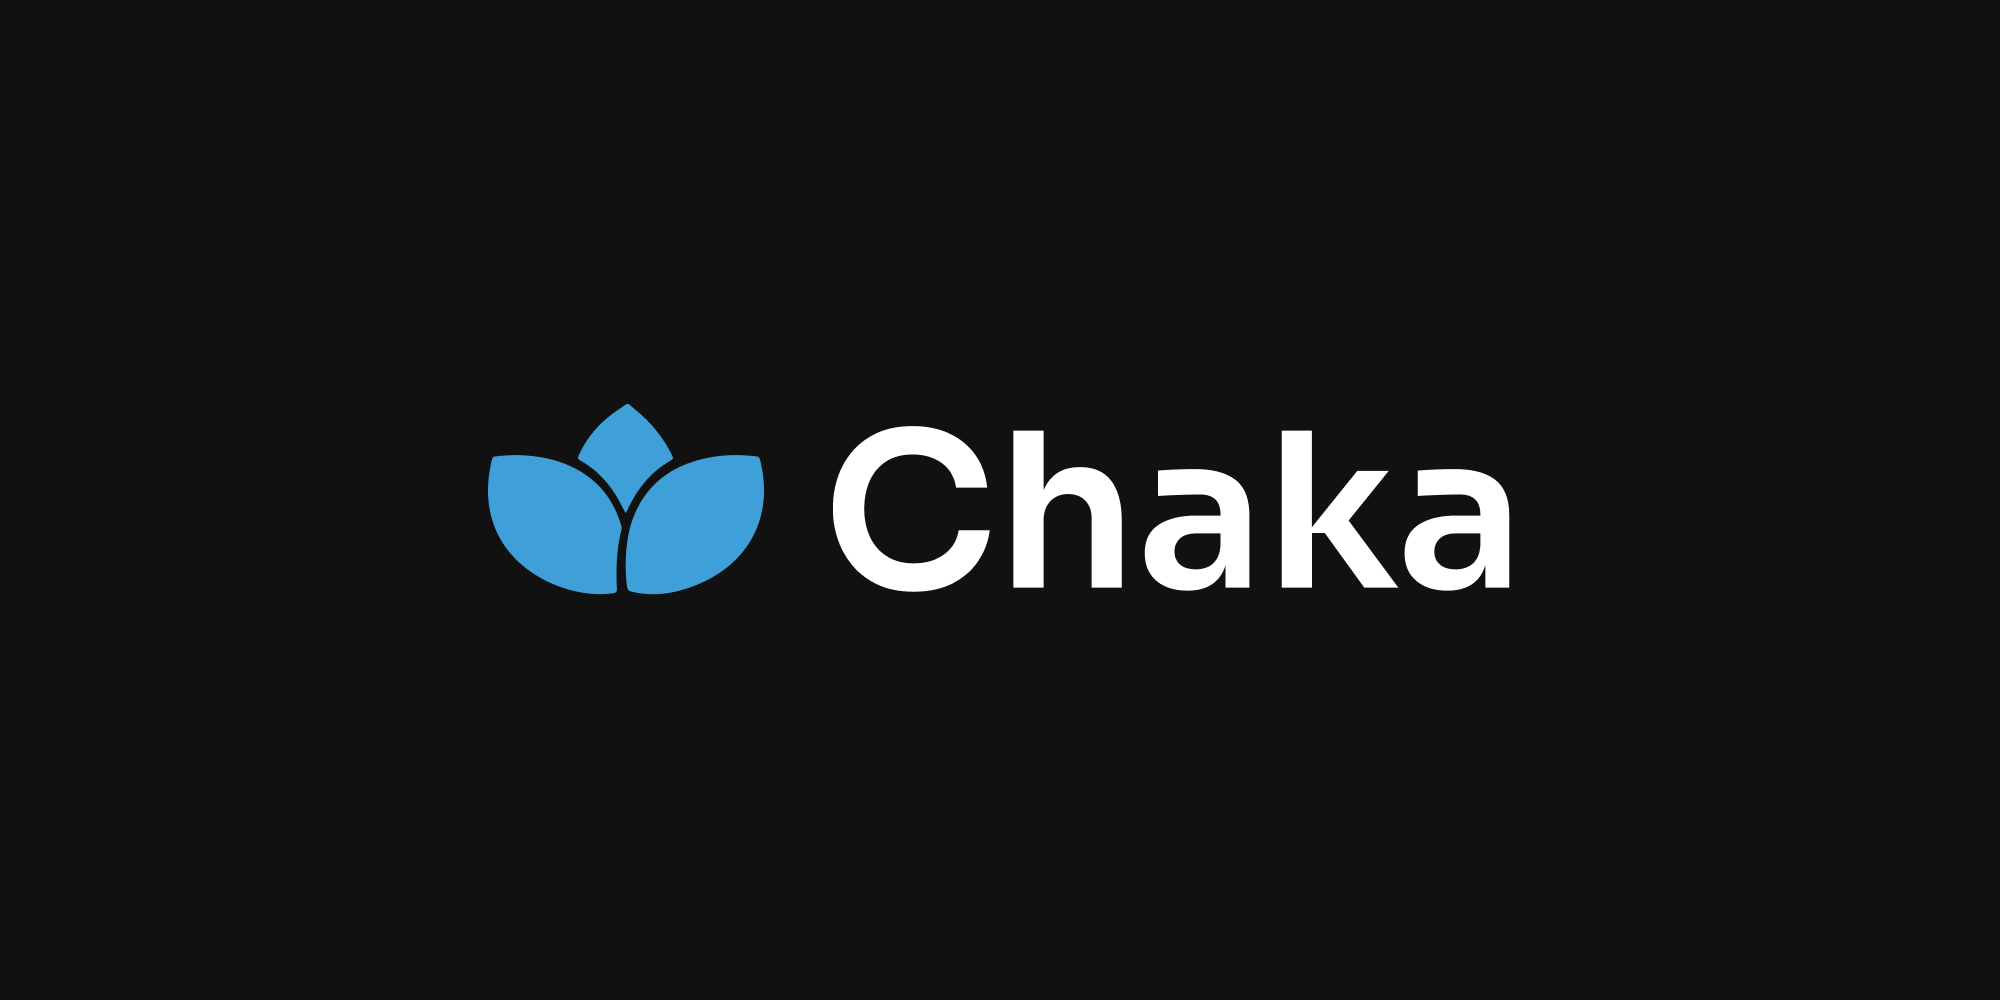 Chaka secures $1.5 million pre-seed funding to expand services and reach even better Chaka has recorded another impressive win in the space of a few weeks alone, bagging a $1.5 million investment round that will enable the company expand its services to even more users and regions. This is the same company that became the first start-up – and company – to obtain the SEC license in Nigeria and resume its operations and services to customers after a brief pause. Launched in 2019, the start-up was born with a dream to make available local and foreign securities and stocks to the Nigerian market looking to invest in such. Even though stocks and securities are not new to the American audience, they are not as favoured by the Nigerian audience. For one, the lack of the proper channels to buy, keep, hold and sell these stocks is a limiting factor. The lack of proper education around them also contributes to the reason why some investors are wary of putting their money in. As if that is not enough, it was almost impossible for the average Nigerian to buy and hold any stocks in companies outside of the Nigerian scape. These are some of the problems that Chaka identified and came in to solve. Playing the local market the same way Robinhood has been able to establish itself for the American audience, it is not surprising to see such growth from this venture in the space of two years. Led by Breyer capital and having other participants such as 4DX Ventures, Golden Palm Investments, Seedstars, Future Africa and Musha Ventures, the capital from this round is sure to catapult Chaka into a better standing and launch an even more exponential growth.